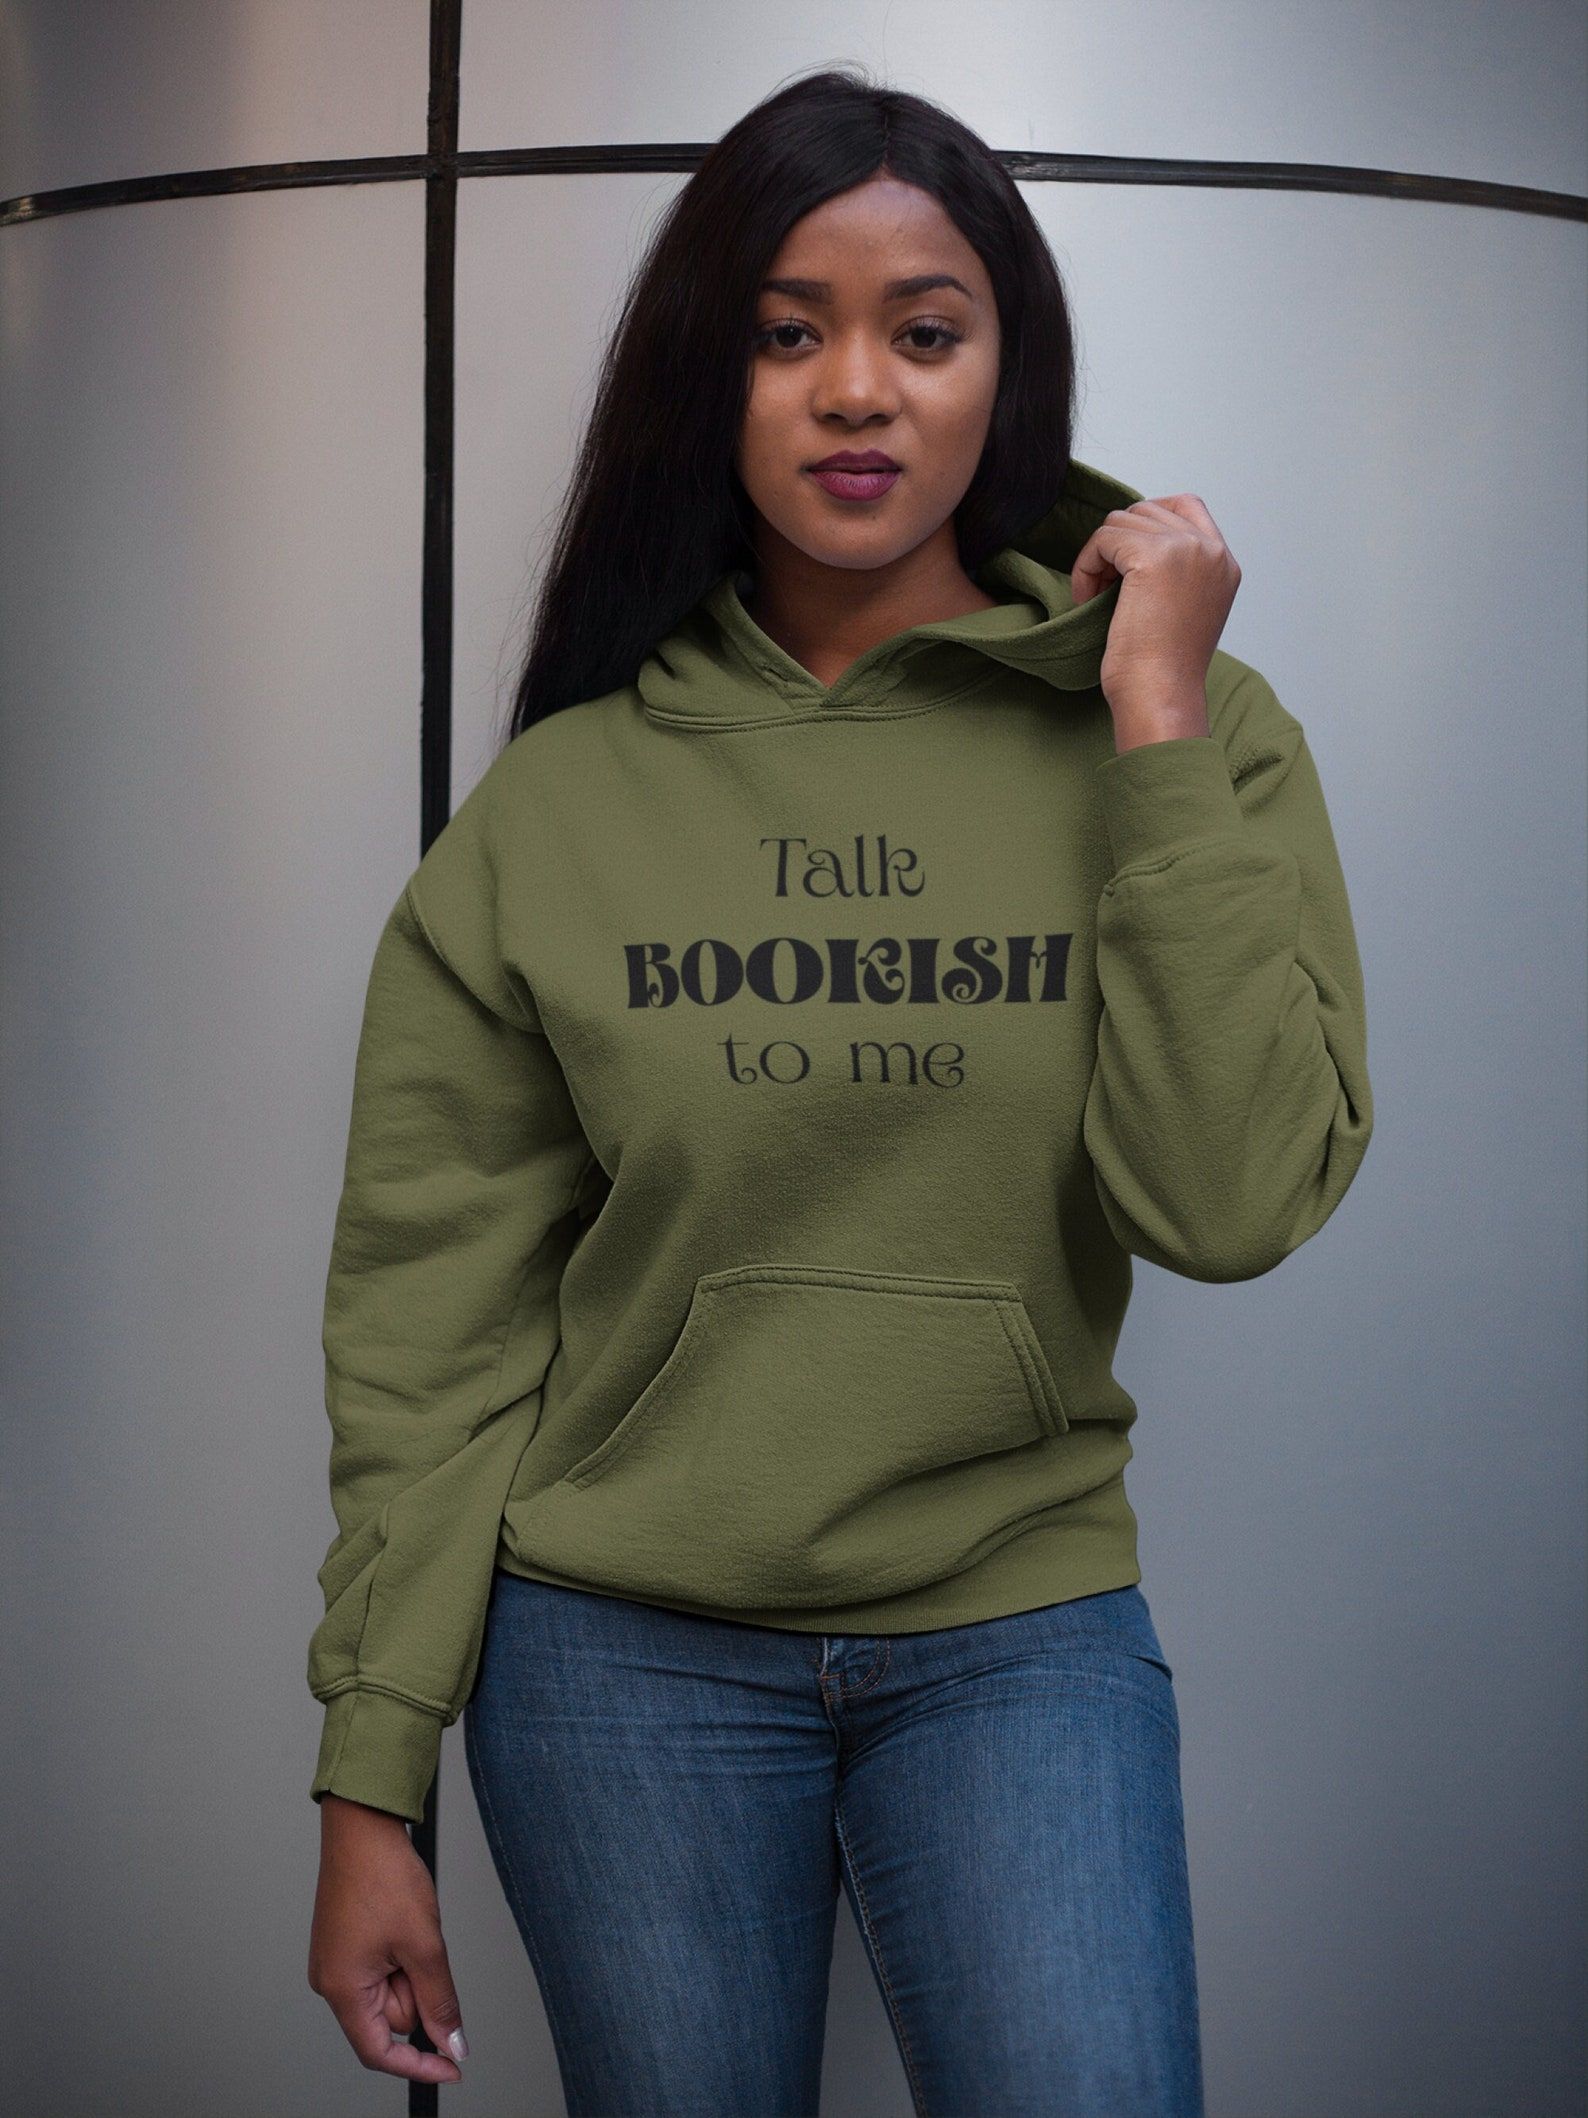 Image of a Black woman wearing an olive green hoodie that reads, in black ink, "Talk bookish to me."